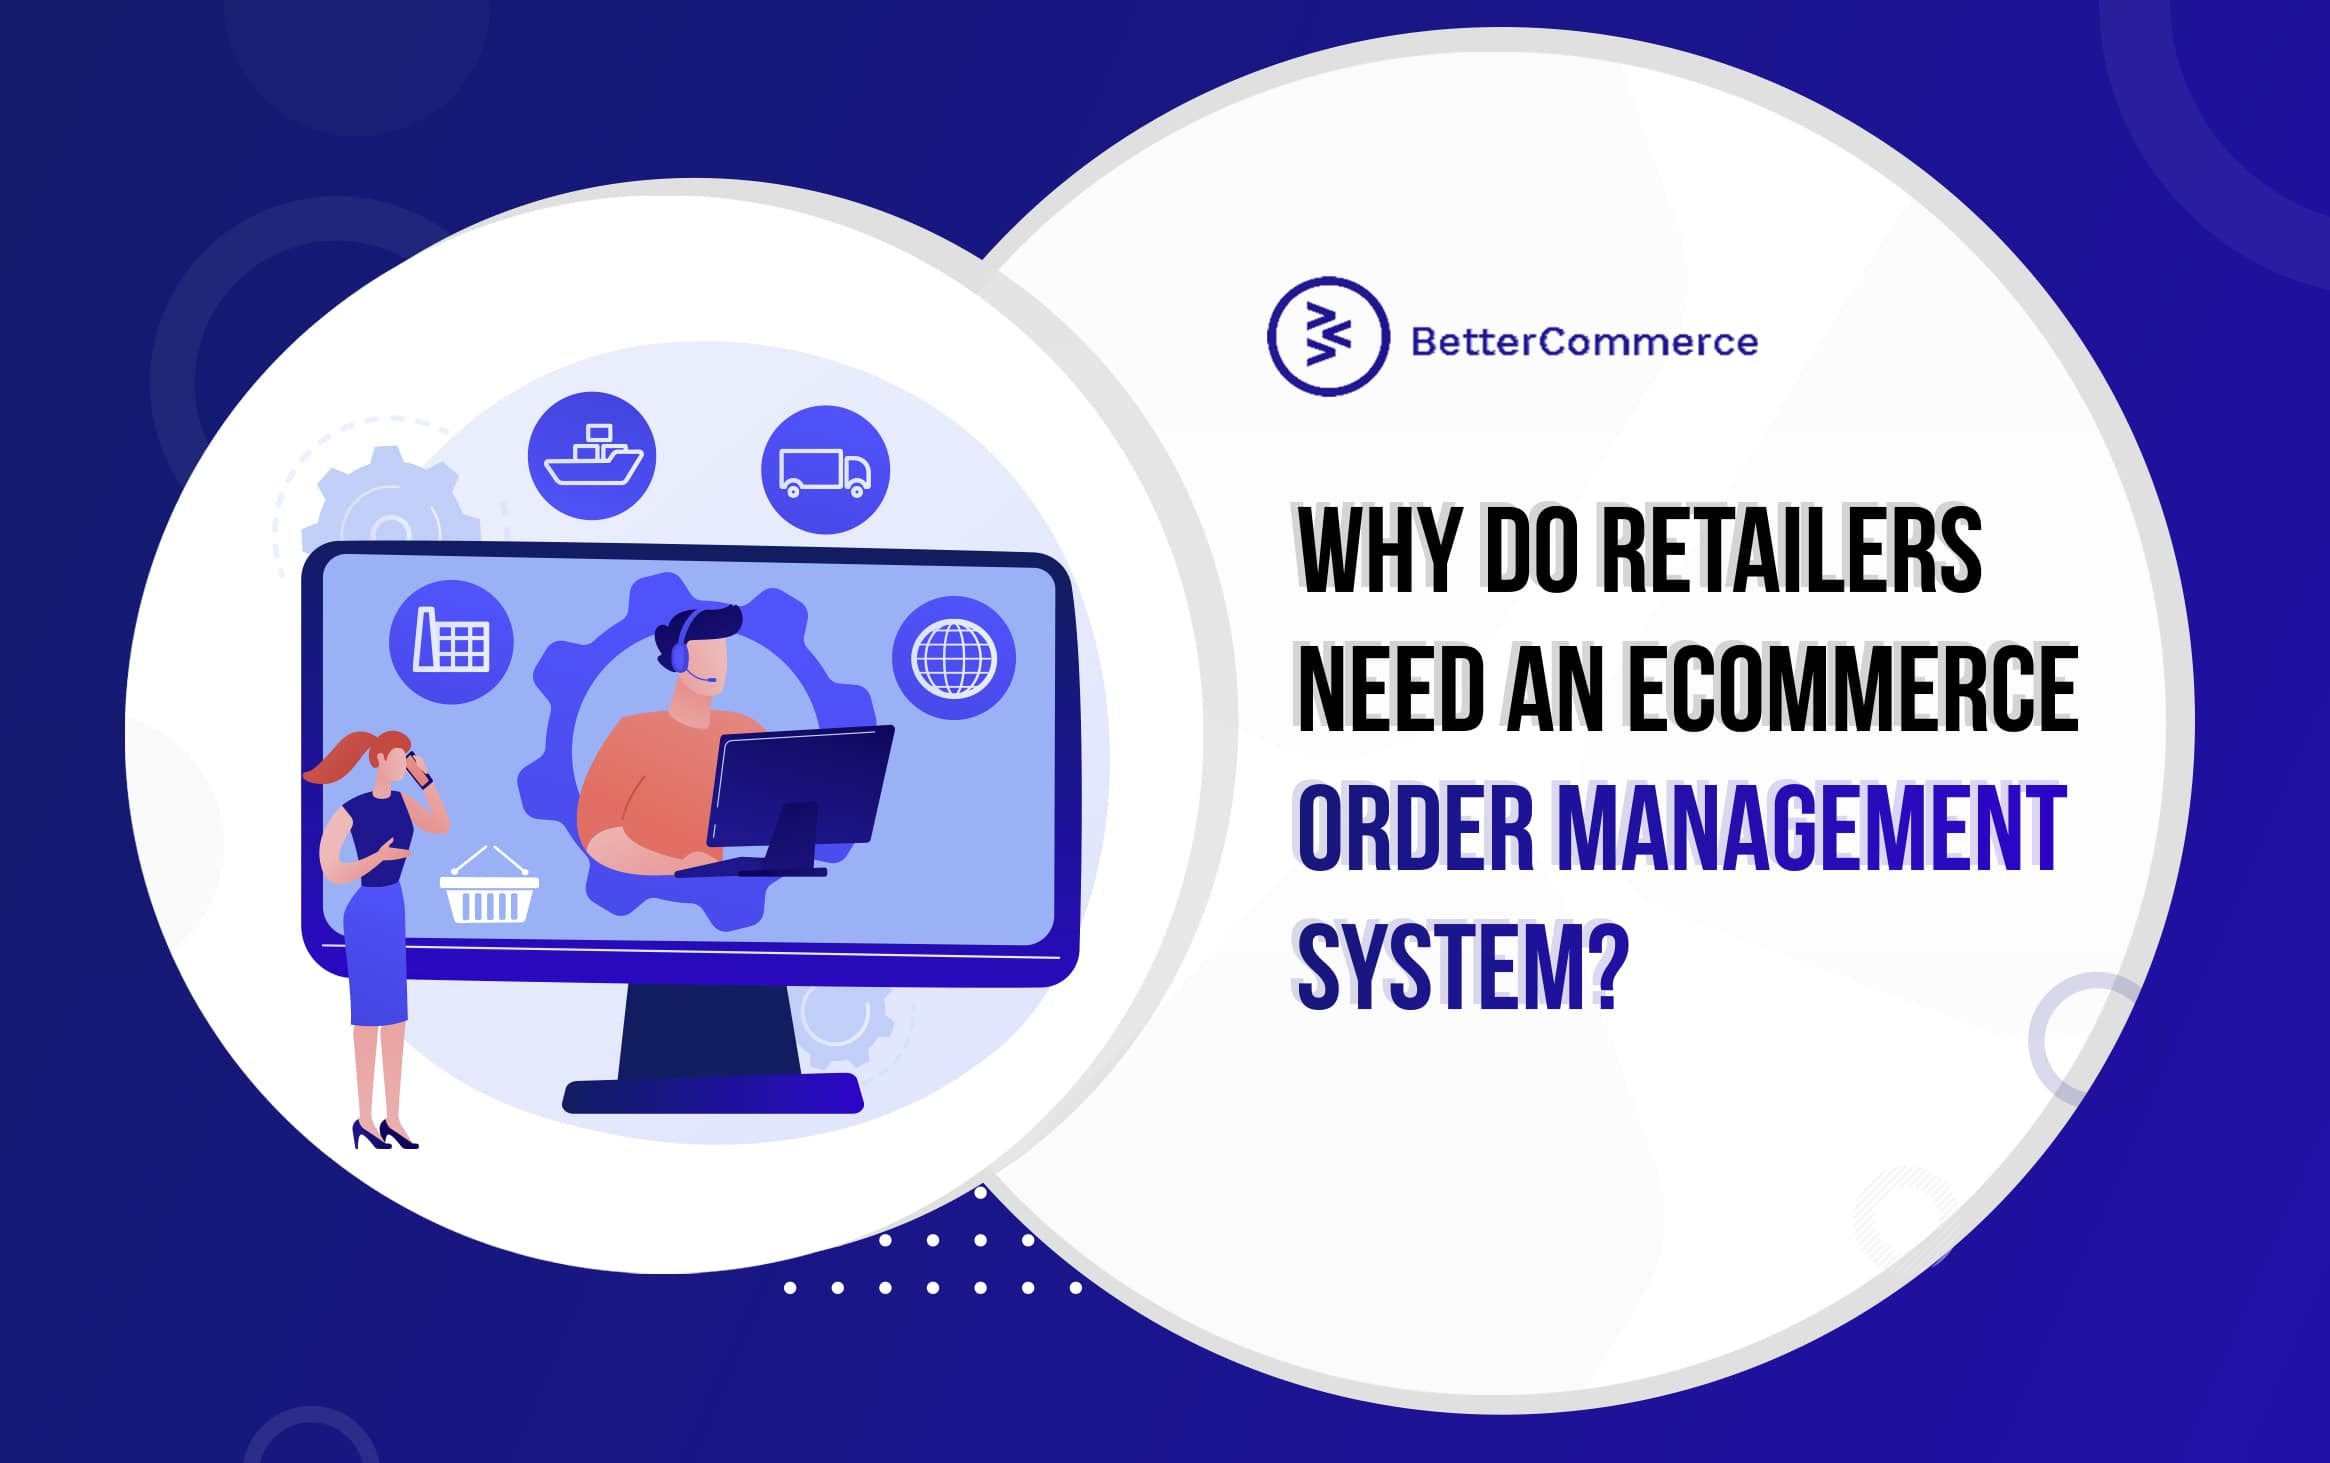 Why do Retailers need an eCommerce Order Management System?